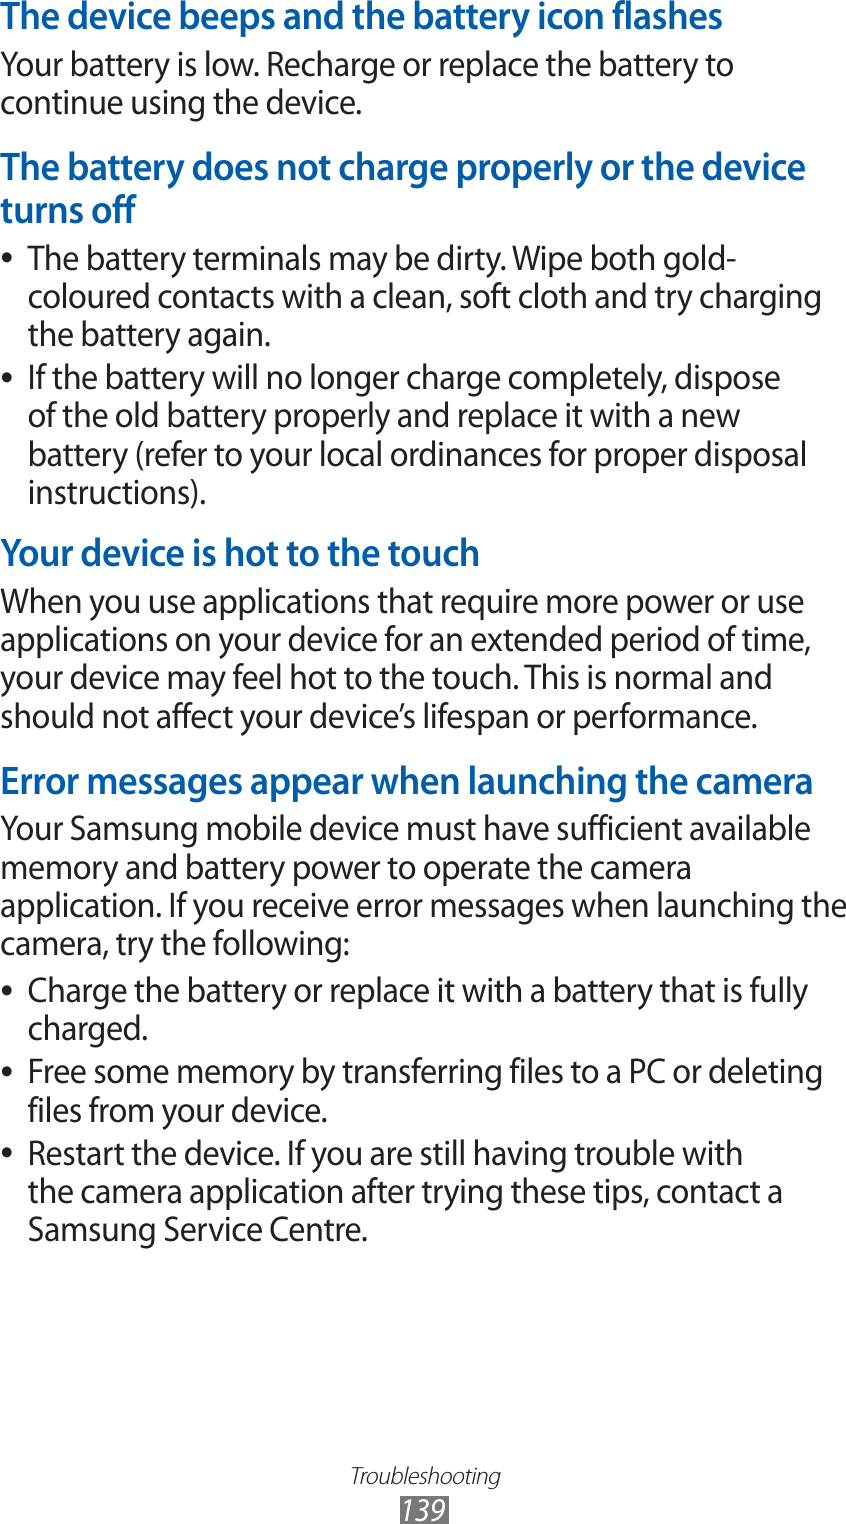 Troubleshooting139The device beeps and the battery icon flashesYour battery is low. Recharge or replace the battery to continue using the device.The battery does not charge properly or the device turns offThe battery terminals may be dirty. Wipe both gold- ●coloured contacts with a clean, soft cloth and try charging the battery again.If the battery will no longer charge completely, dispose  ●of the old battery properly and replace it with a new battery (refer to your local ordinances for proper disposal instructions).Your device is hot to the touchWhen you use applications that require more power or use applications on your device for an extended period of time, your device may feel hot to the touch. This is normal and should not affect your device’s lifespan or performance.Error messages appear when launching the cameraYour Samsung mobile device must have sufficient available memory and battery power to operate the camera application. If you receive error messages when launching the camera, try the following:Charge the battery or replace it with a battery that is fully  ●charged.Free some memory by transferring files to a PC or deleting  ●files from your device.Restart the device. If you are still having trouble with  ●the camera application after trying these tips, contact a Samsung Service Centre.